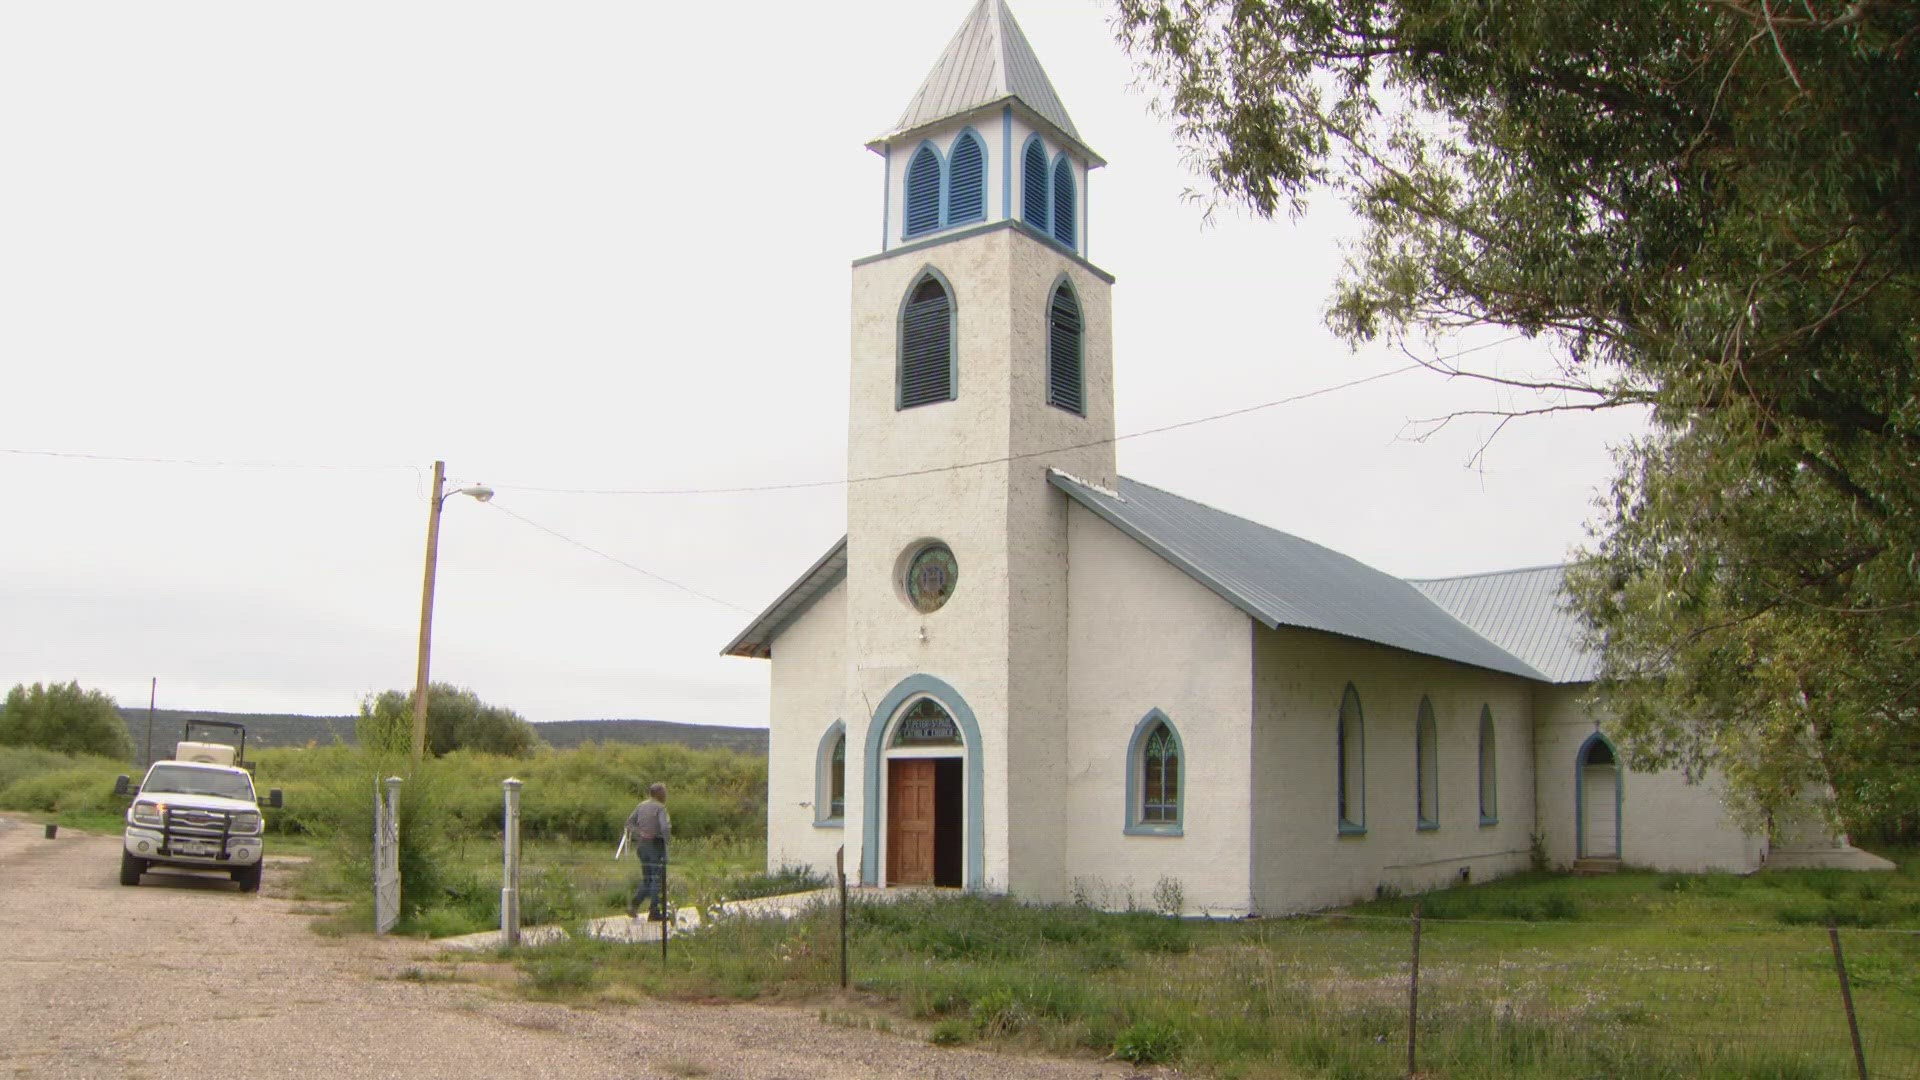 For 160 years, the village of San Pedro, Colorado has always had a church, but now people worry their historic building can’t be saved.